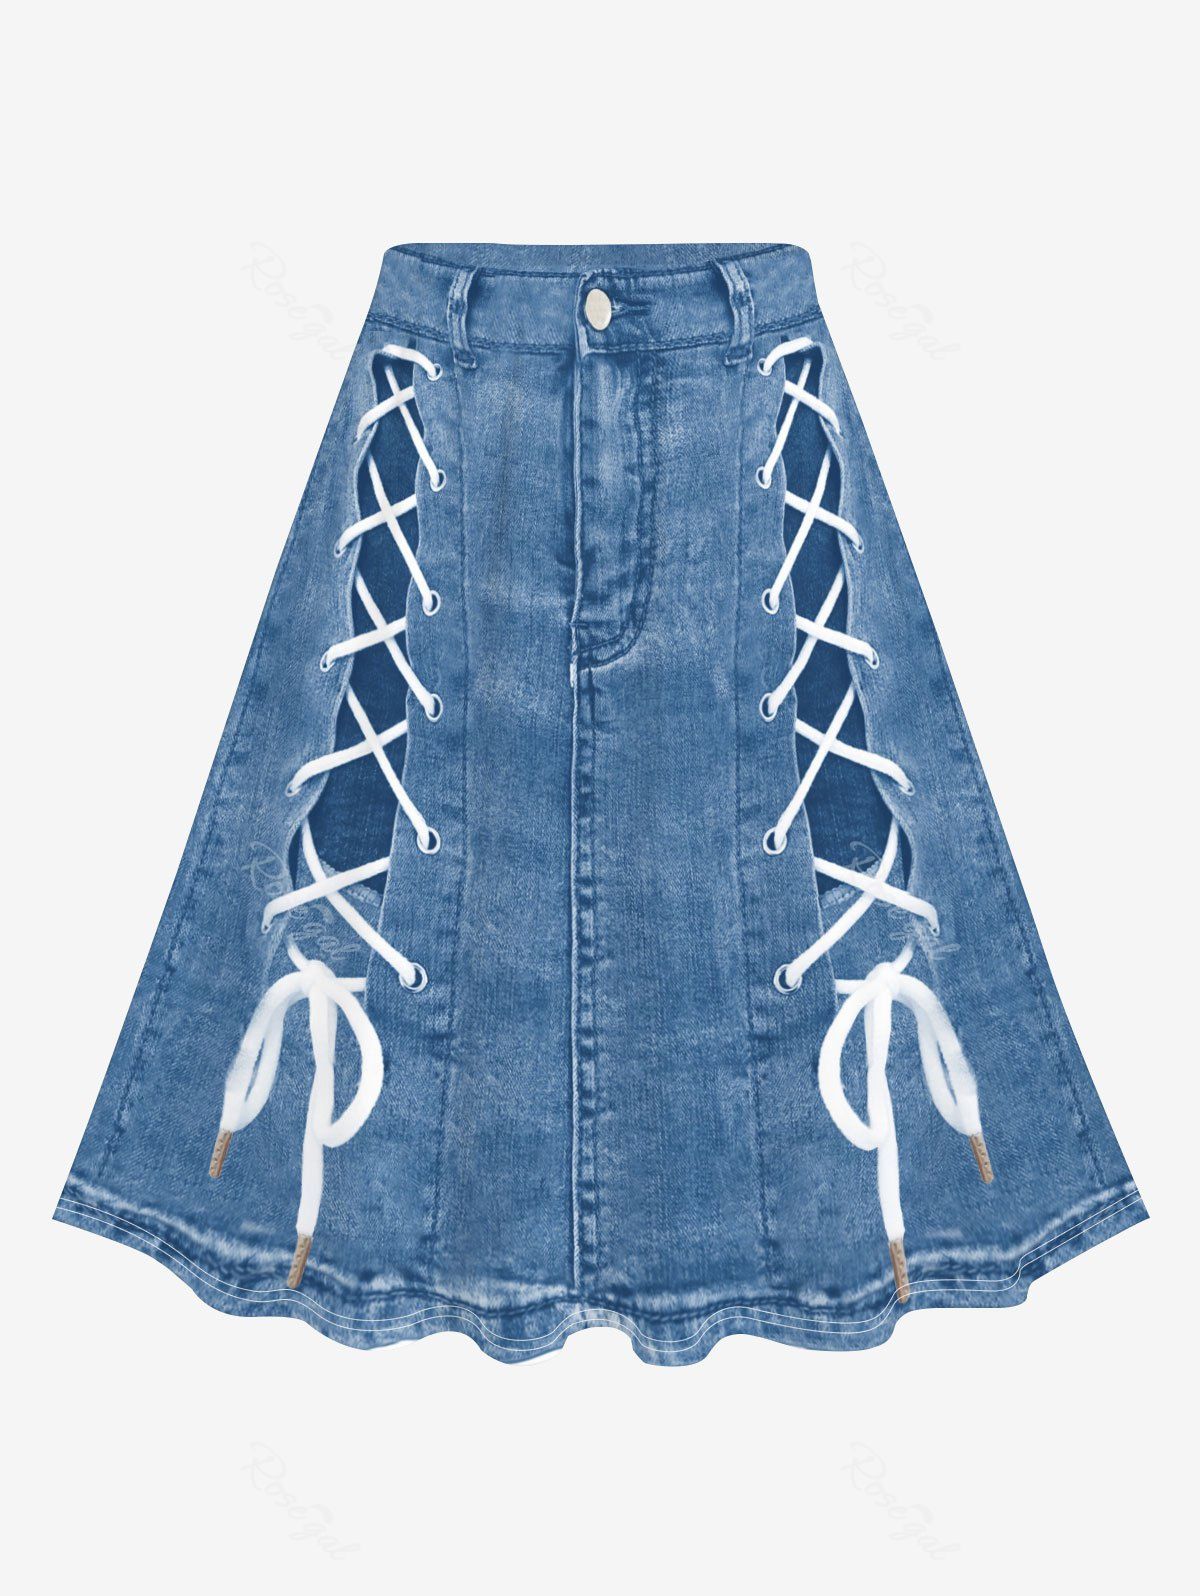 Chic Plus Size 3D Jeans Lace Up Printed Skirt  